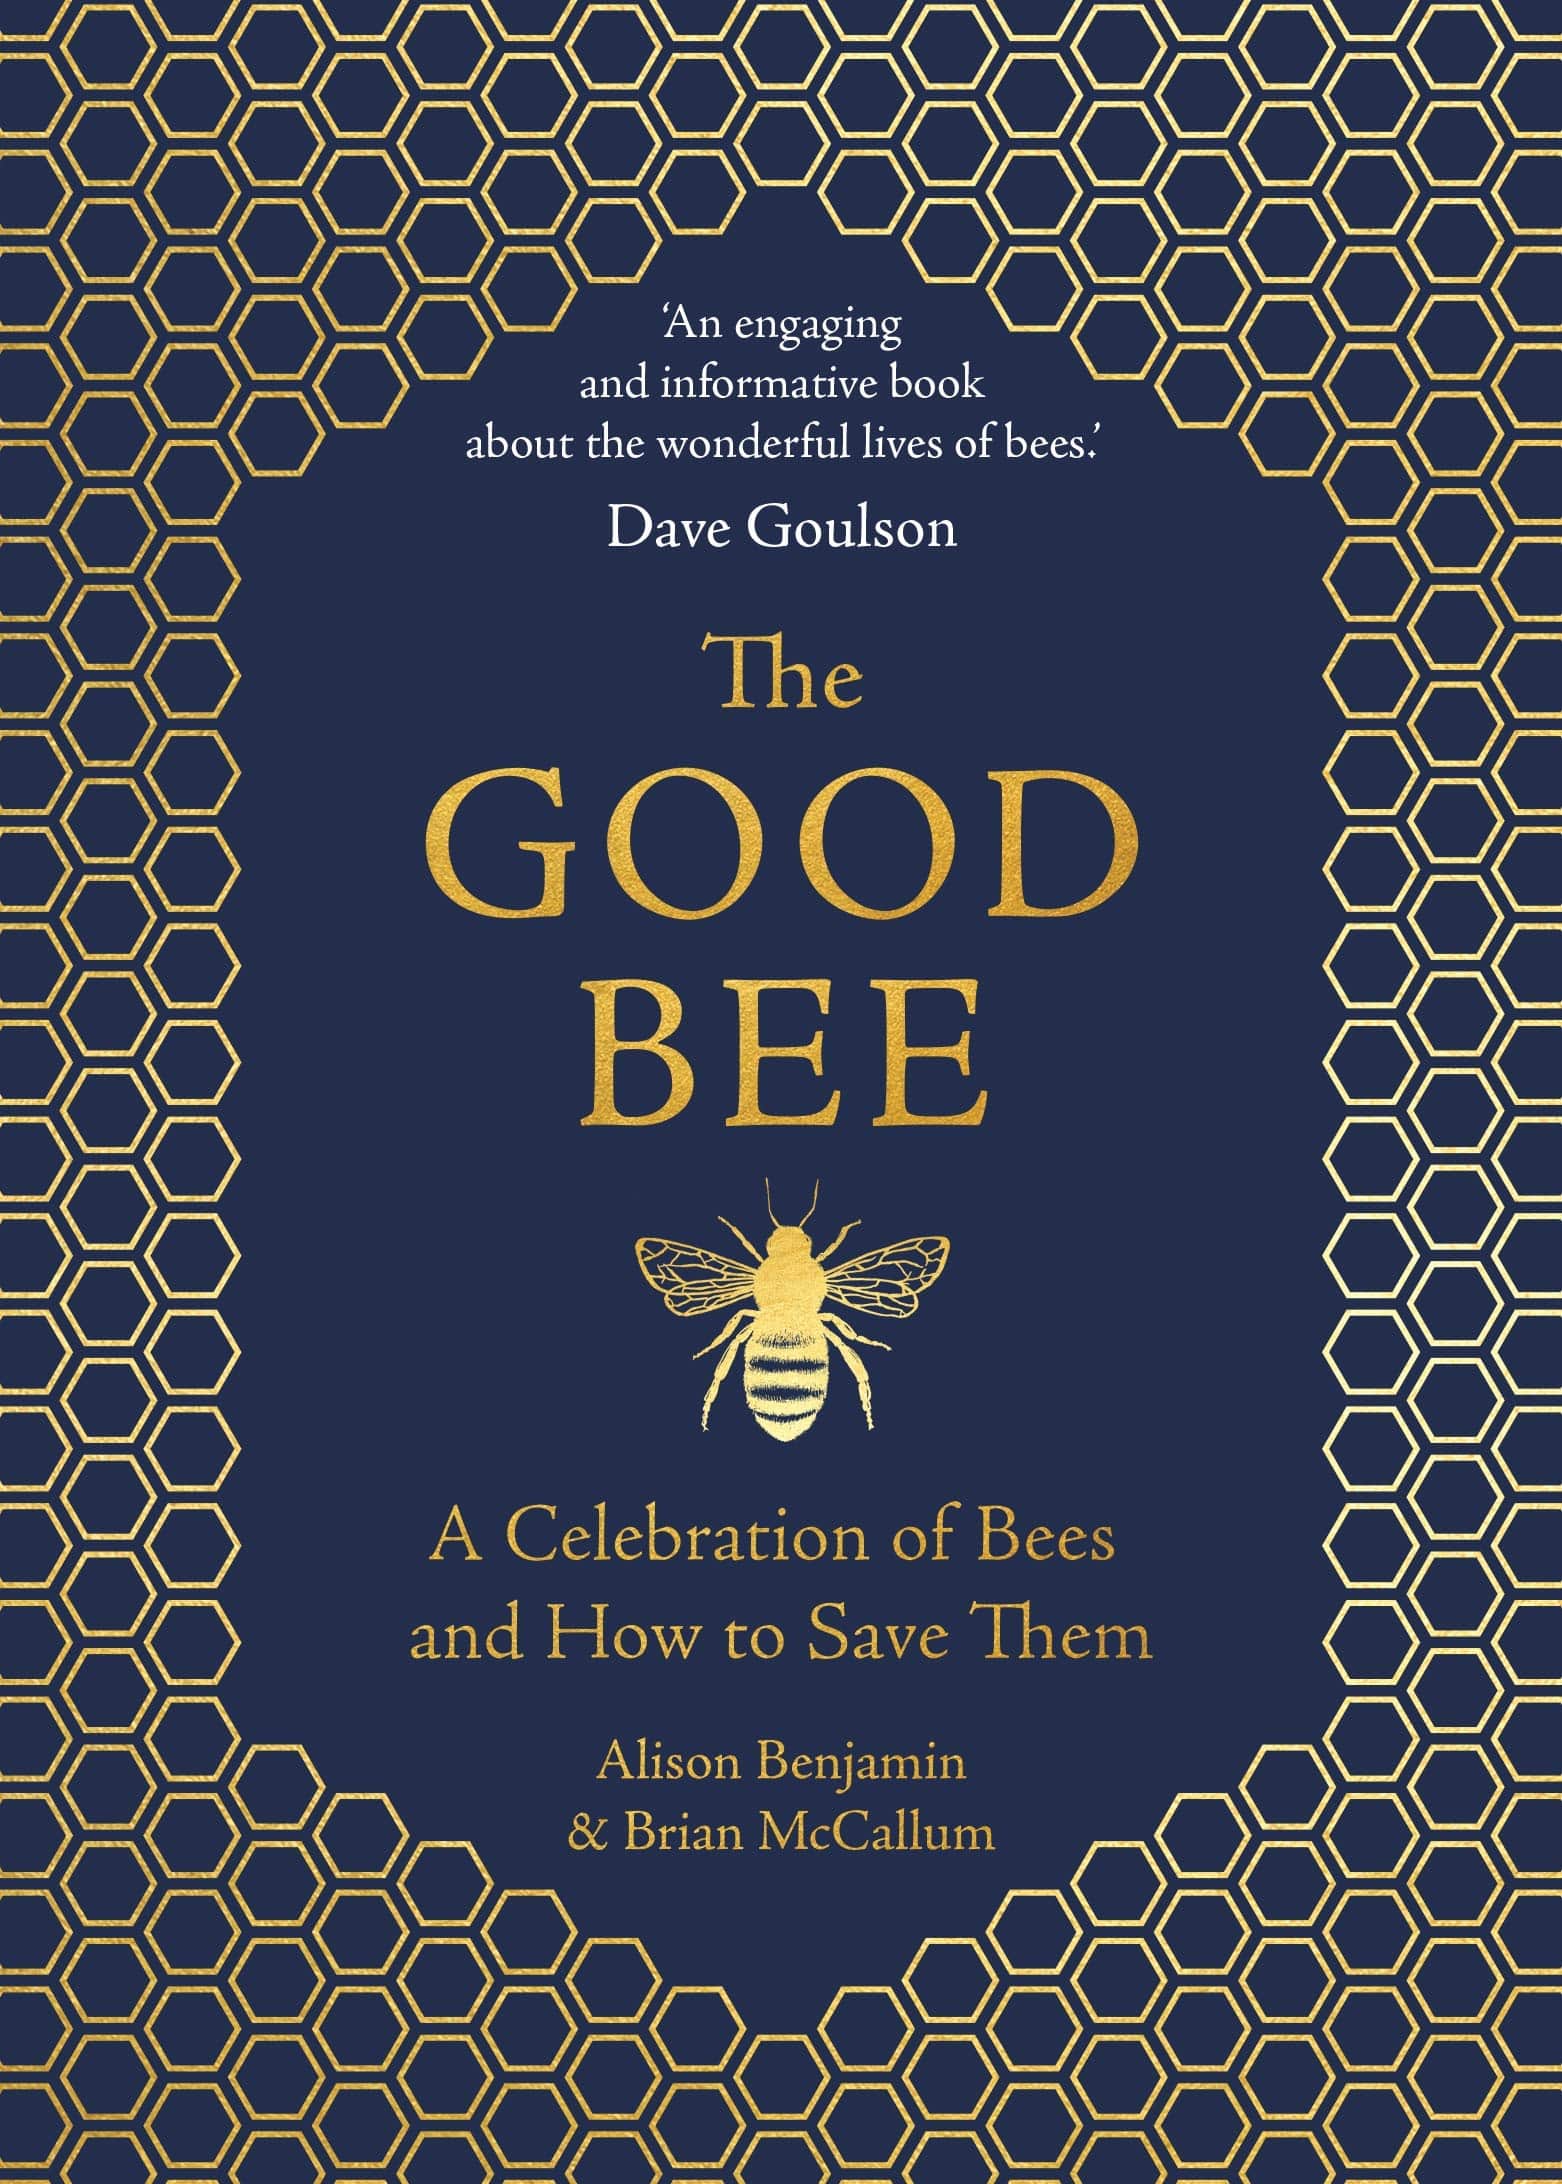 The Good Bee: A Celebration of Bees – And How to Save Them [Book]